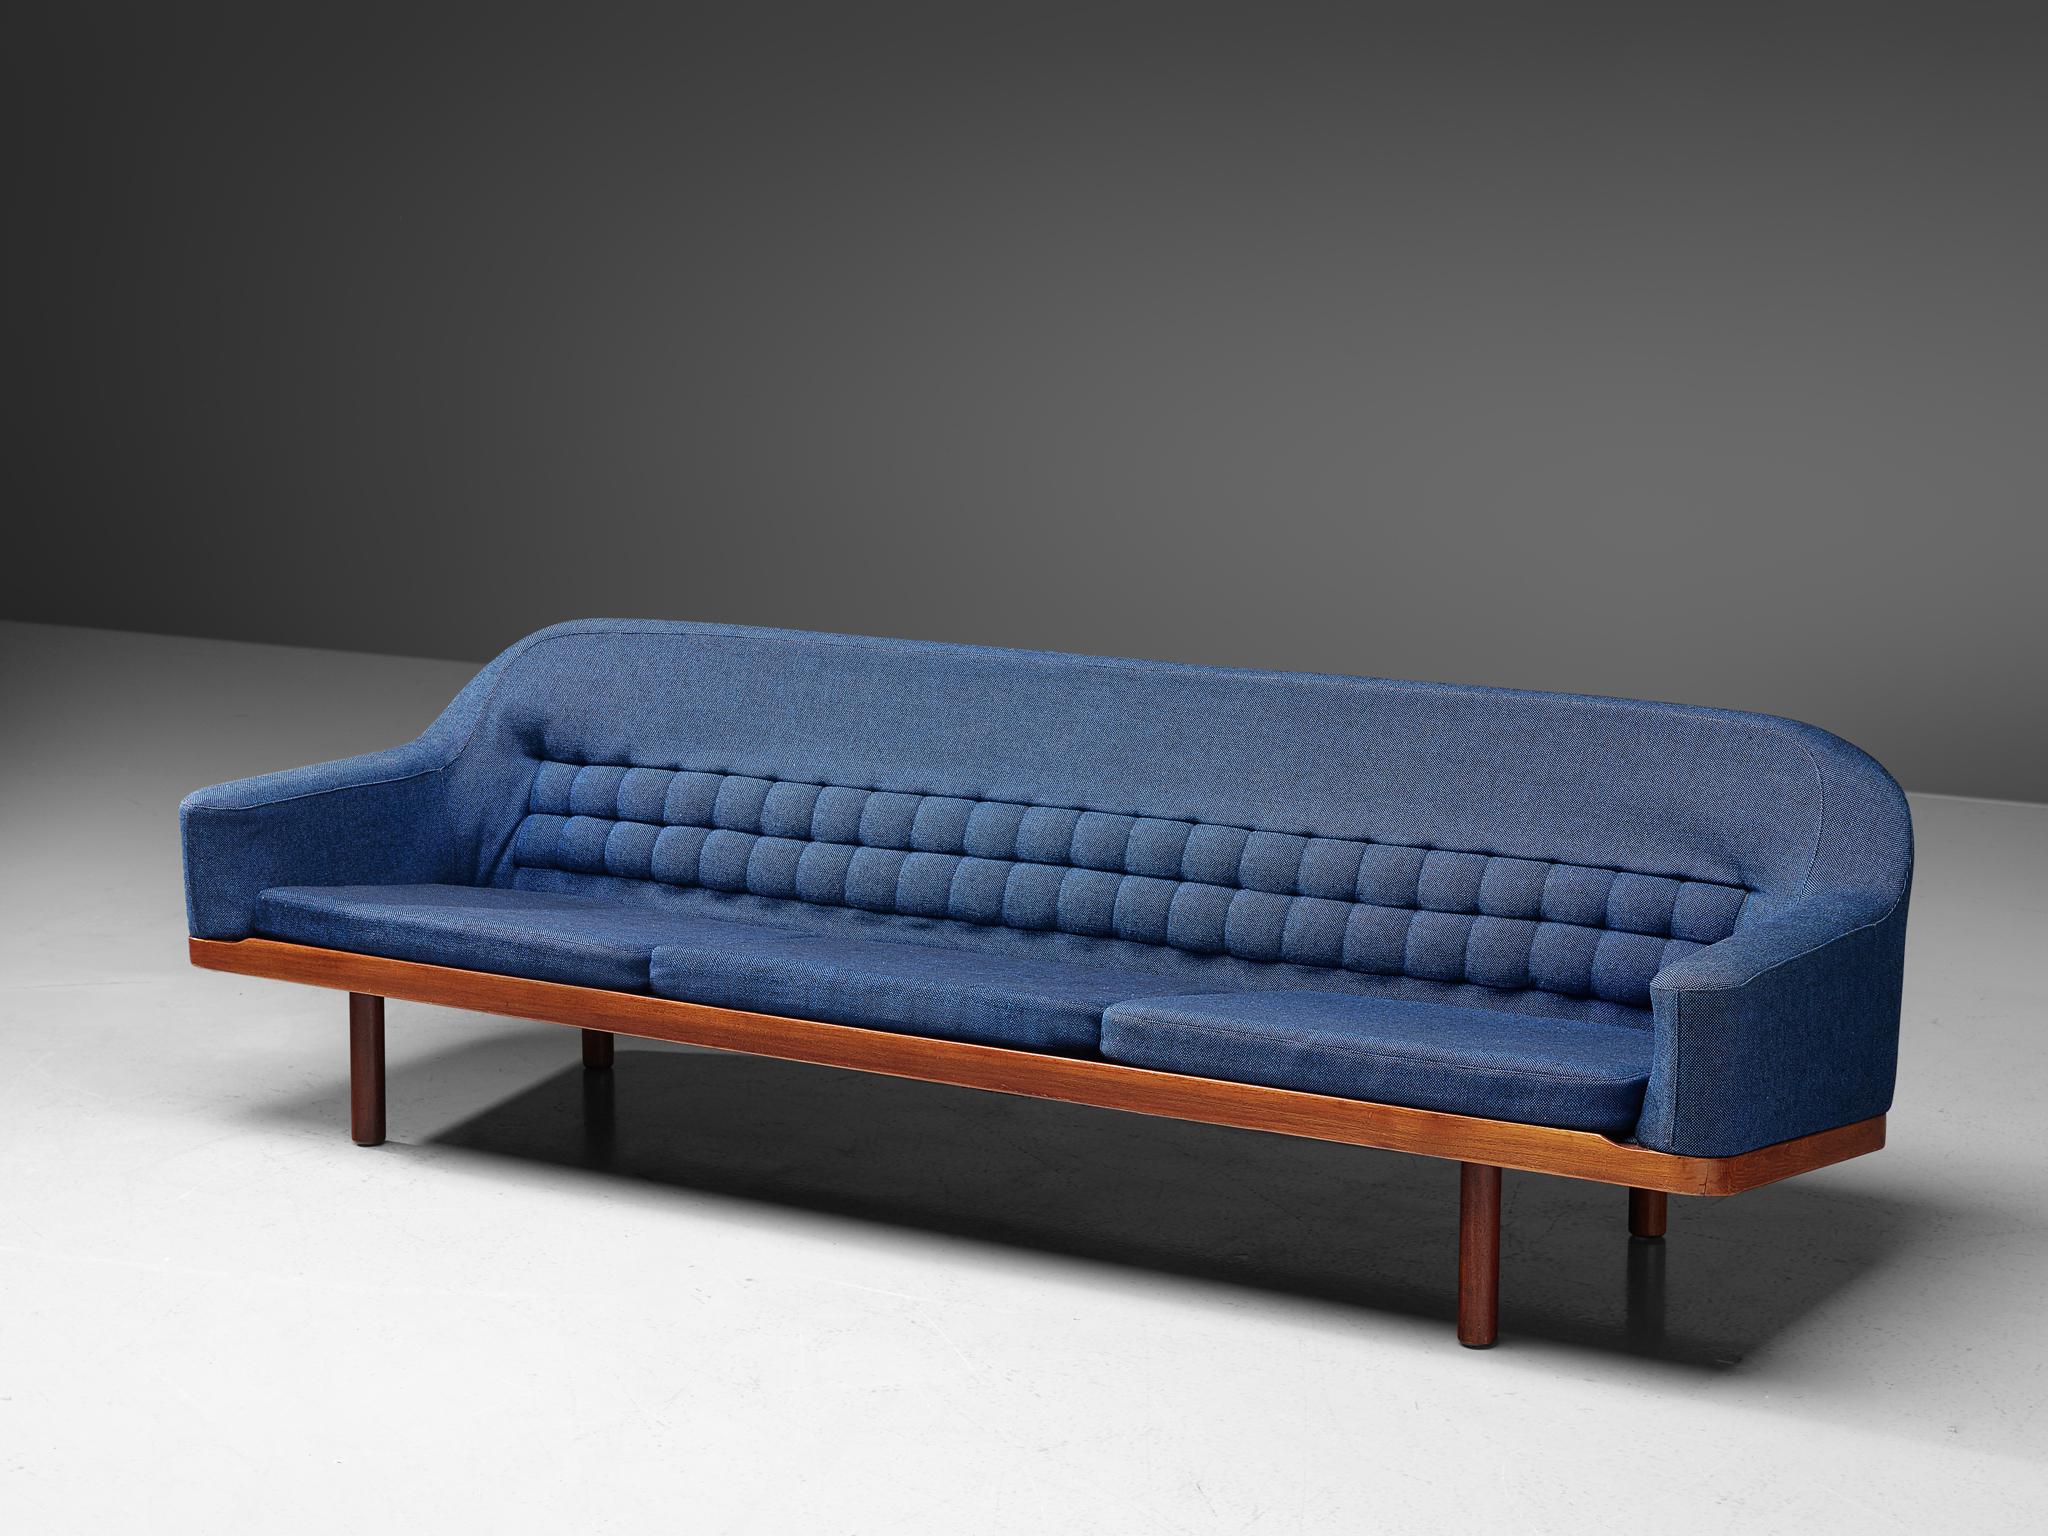 Arne Halvorsen, sofa, model '2010', teak, blue fabric, Norway, 1960s

A large sofa designed by Norwegian designer Arne Halvorsen. This sofa is characterized by its tufted geometric shaped back in combination with beautifully rounded armrests. The